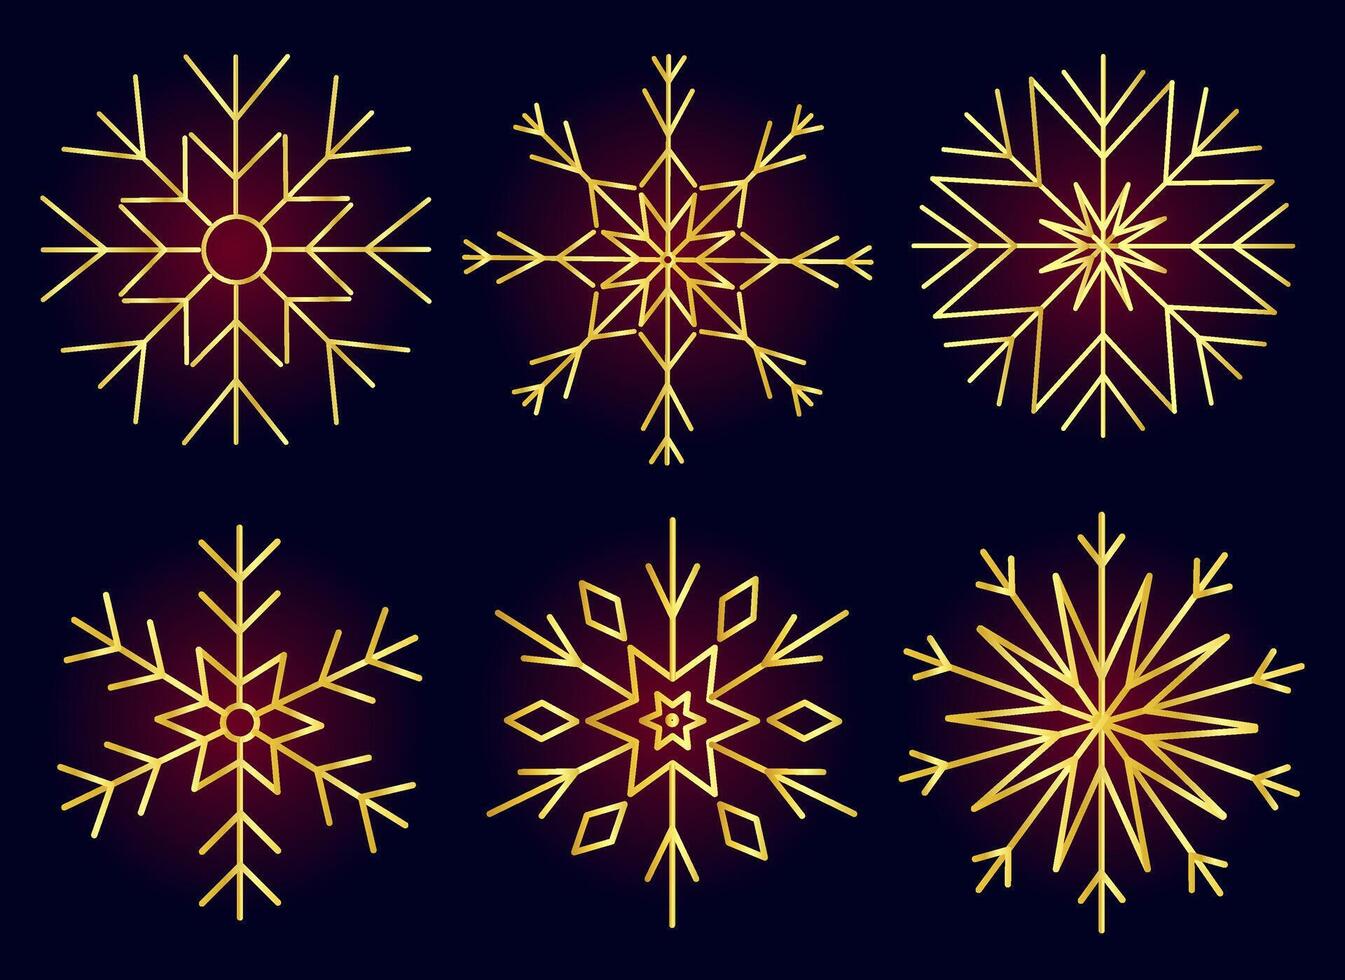 Set of golden linear snowflakes. Christmas gold elements. Glowing elements for Christmas and New Year. Vector illustration